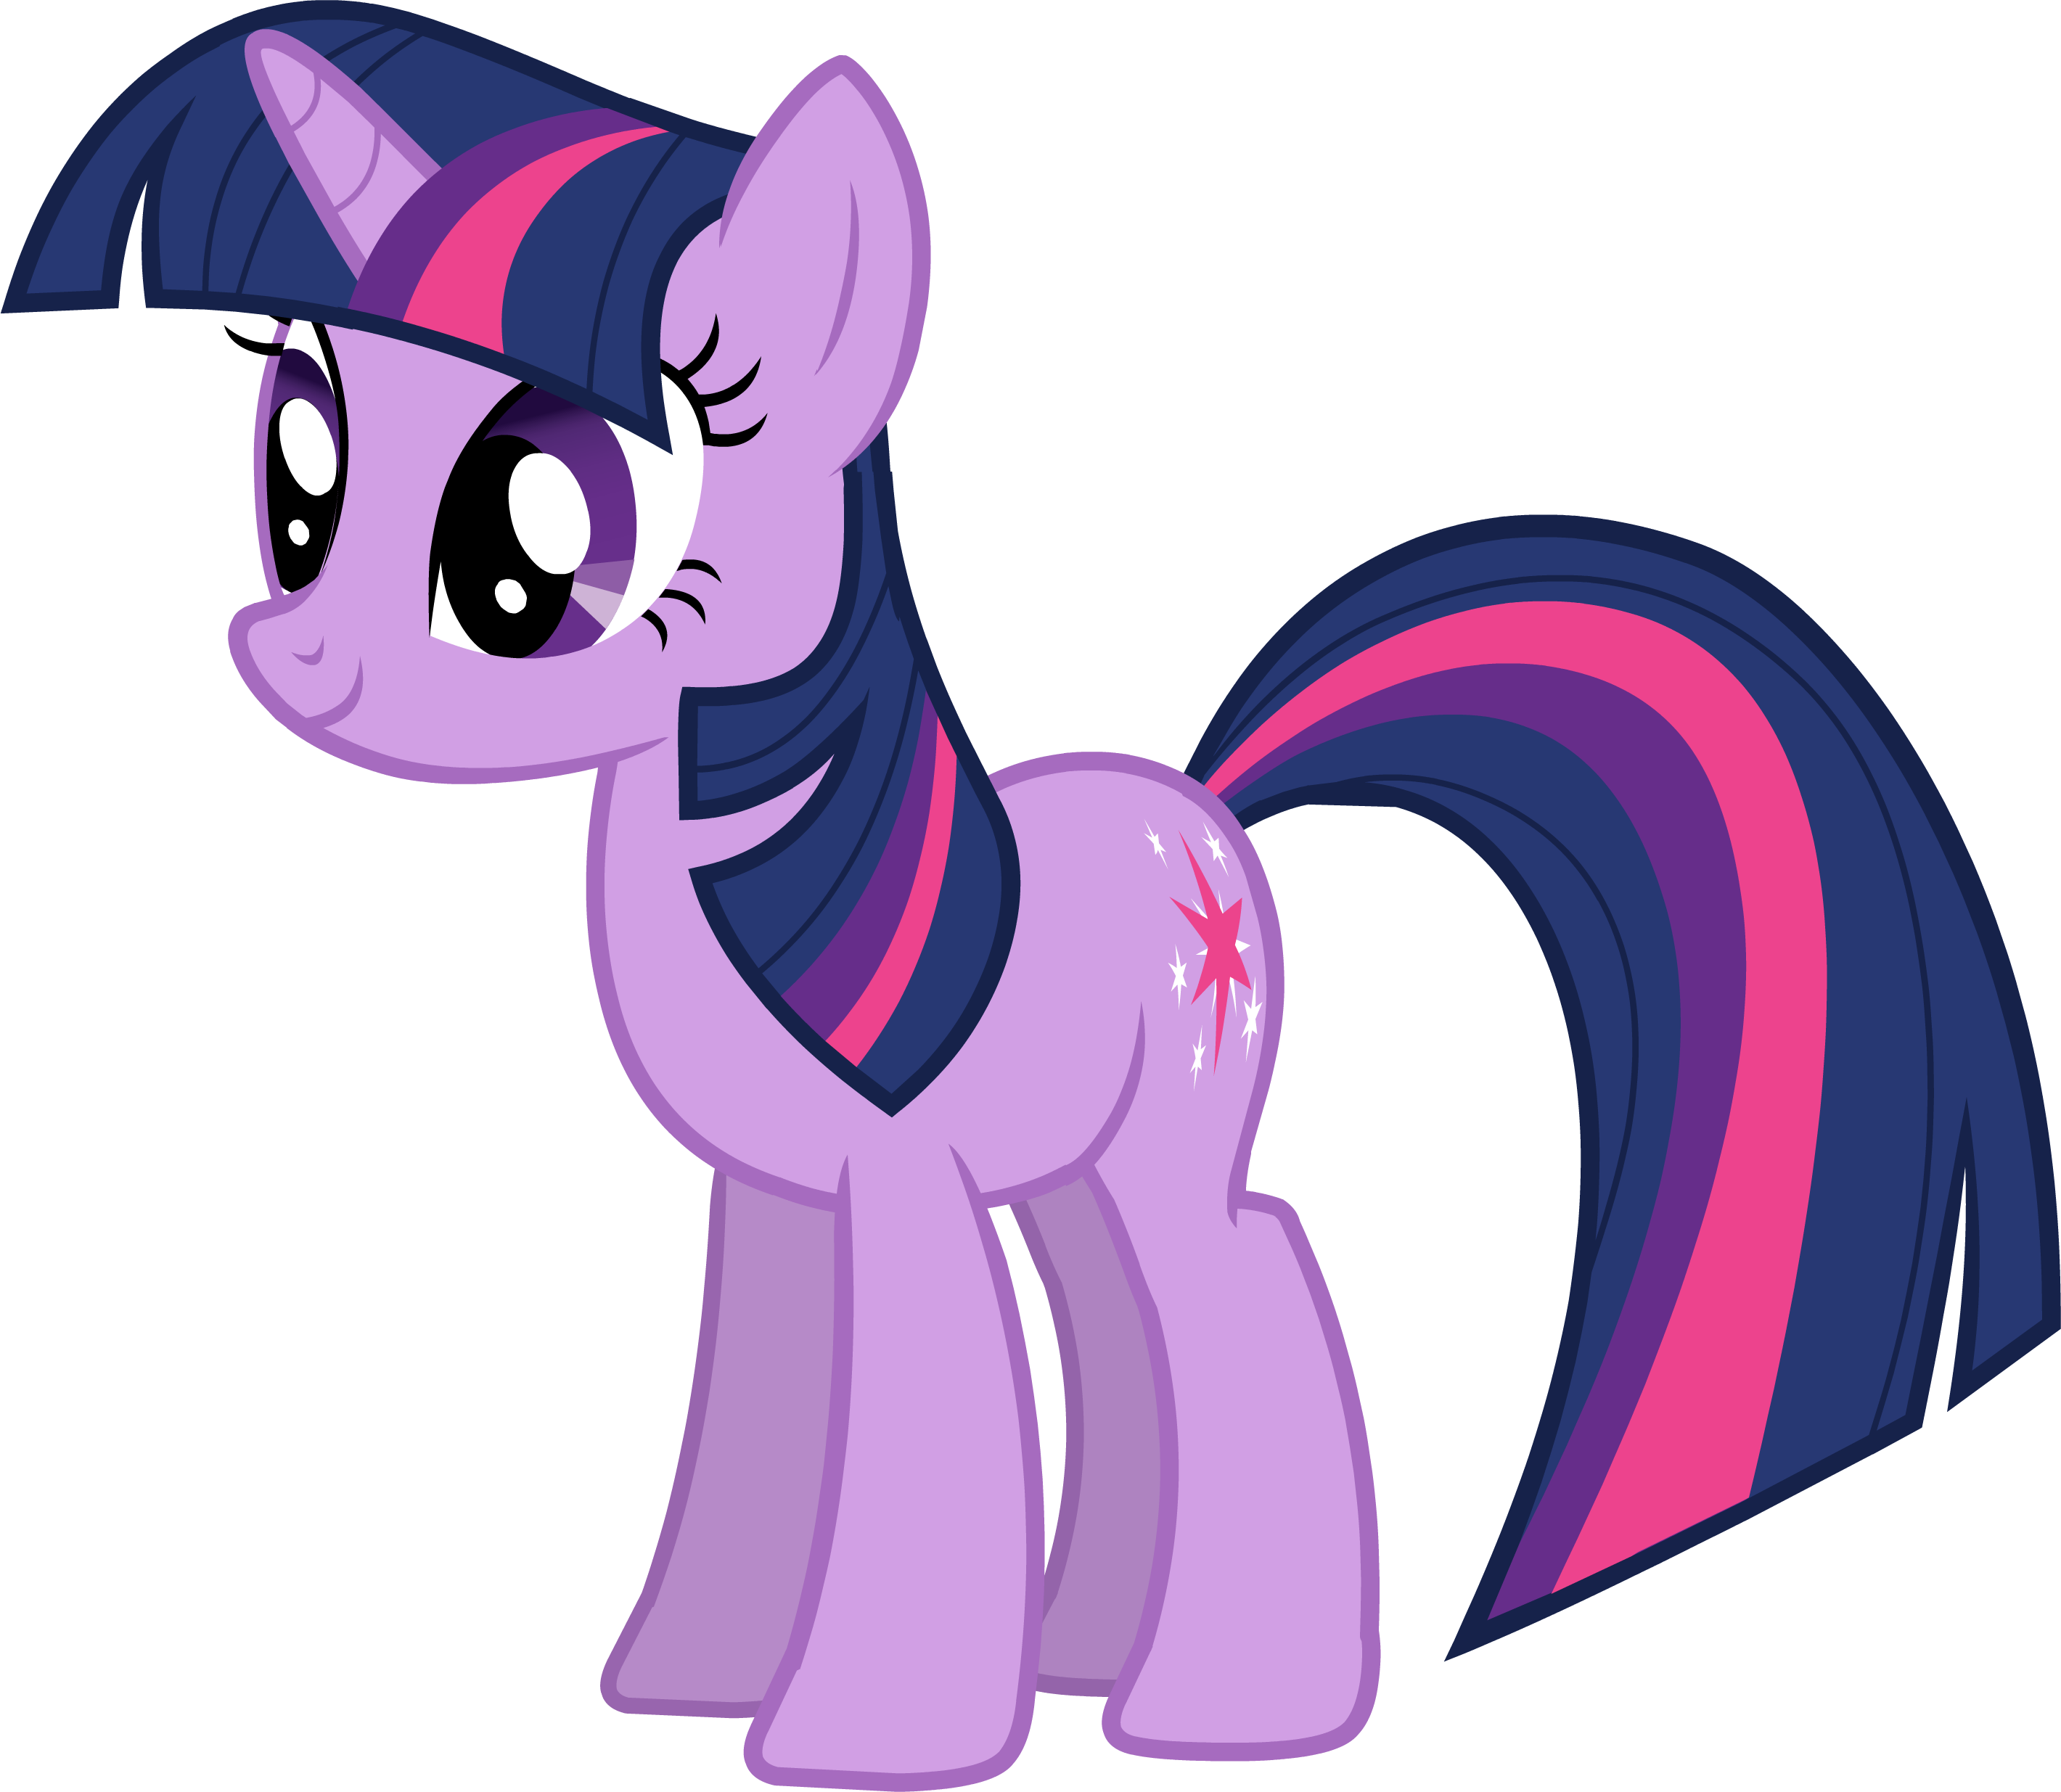 Download Twilight Sparkle - Friendship Is Magic Twilight Sparkle PNG Image  with No Background 